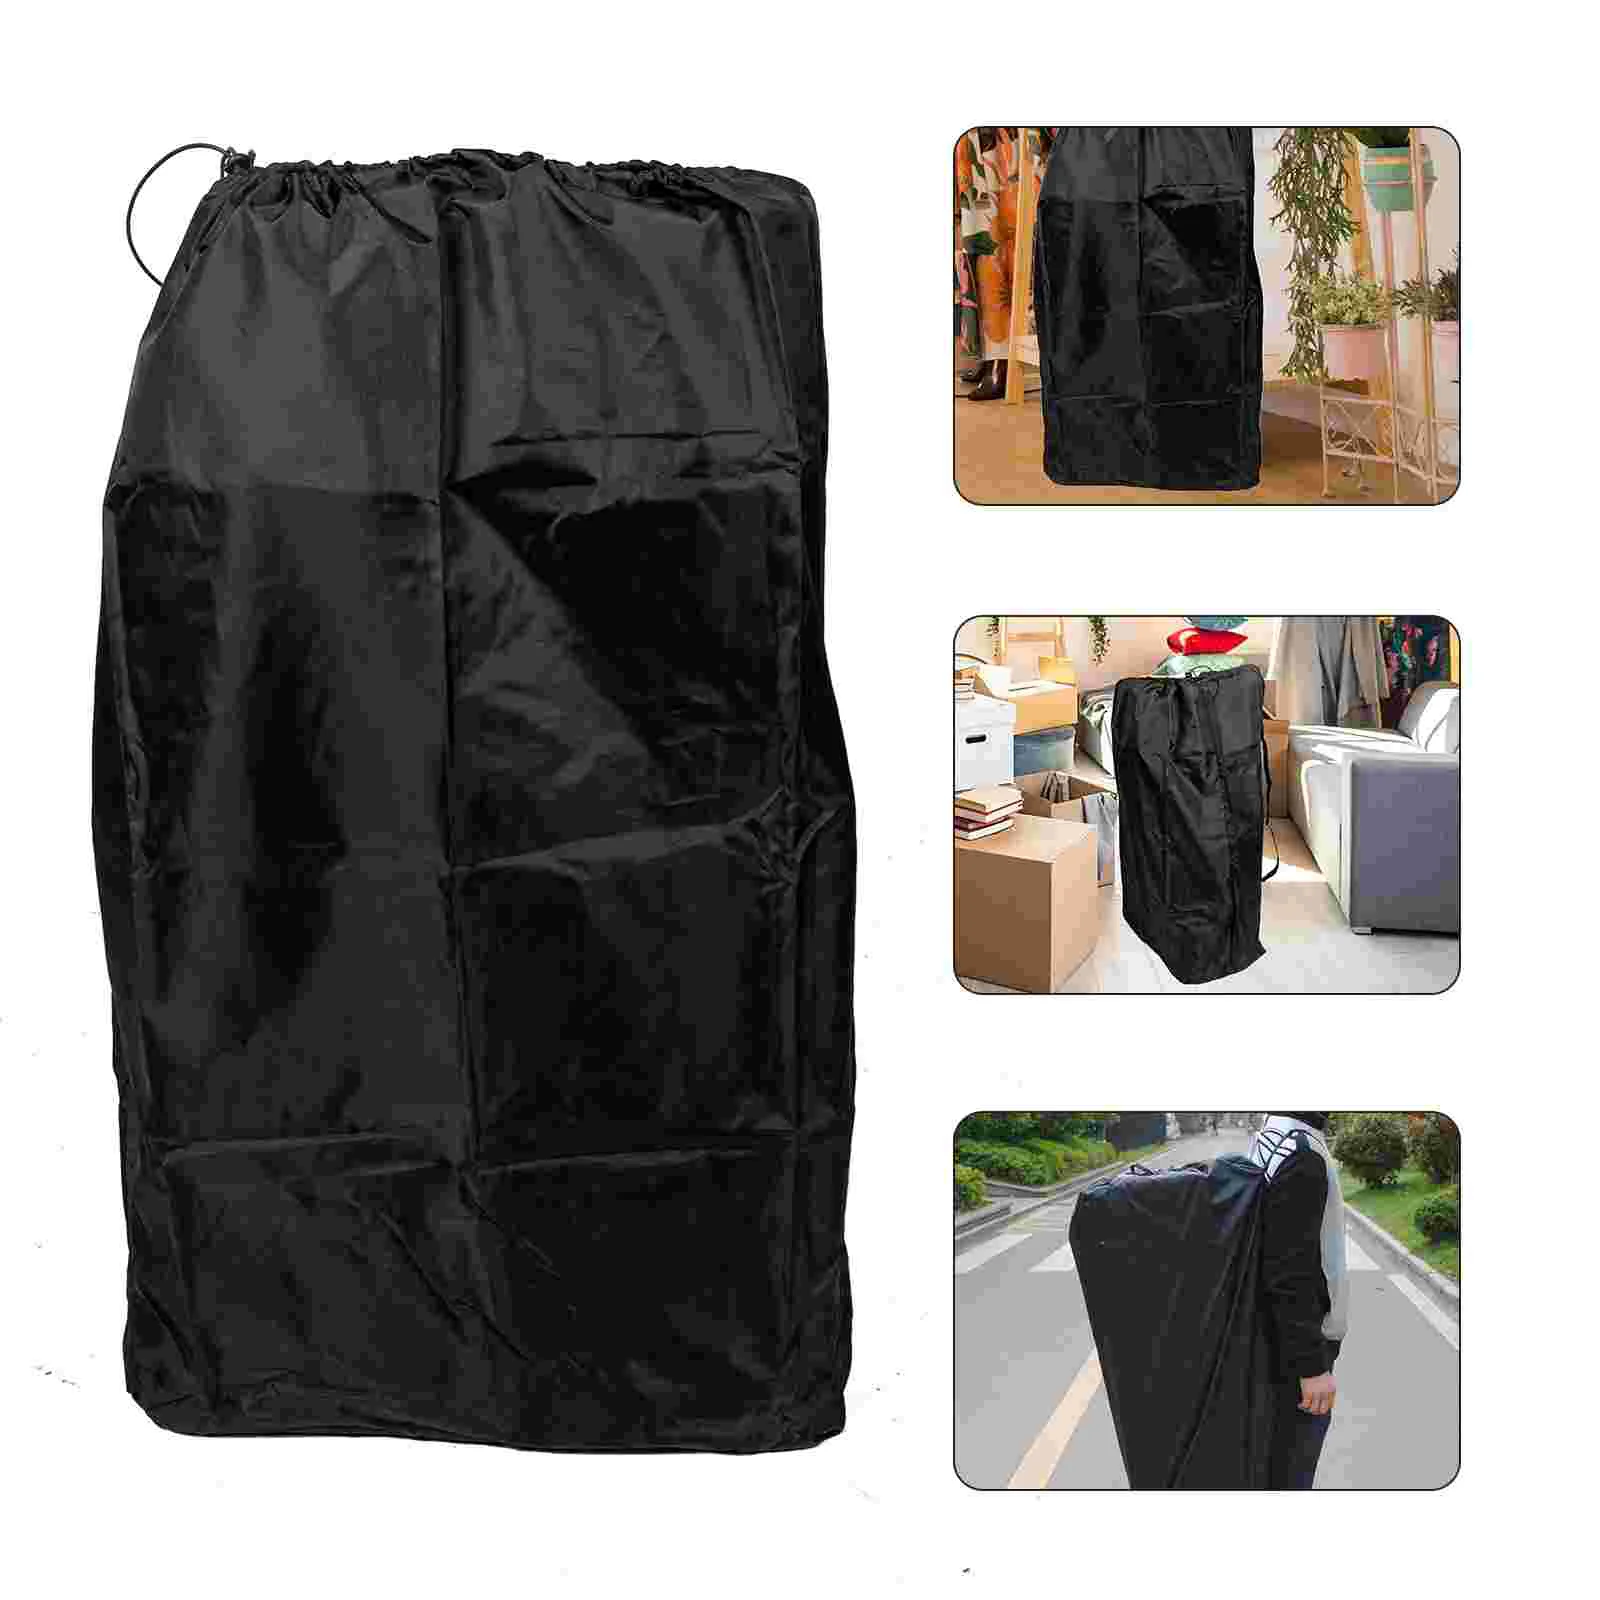 Stroller Bag Travel Gate Check Carrier Airplane Luggage Carrying Storage Cover Suitcase Carseat Carry Pushchair